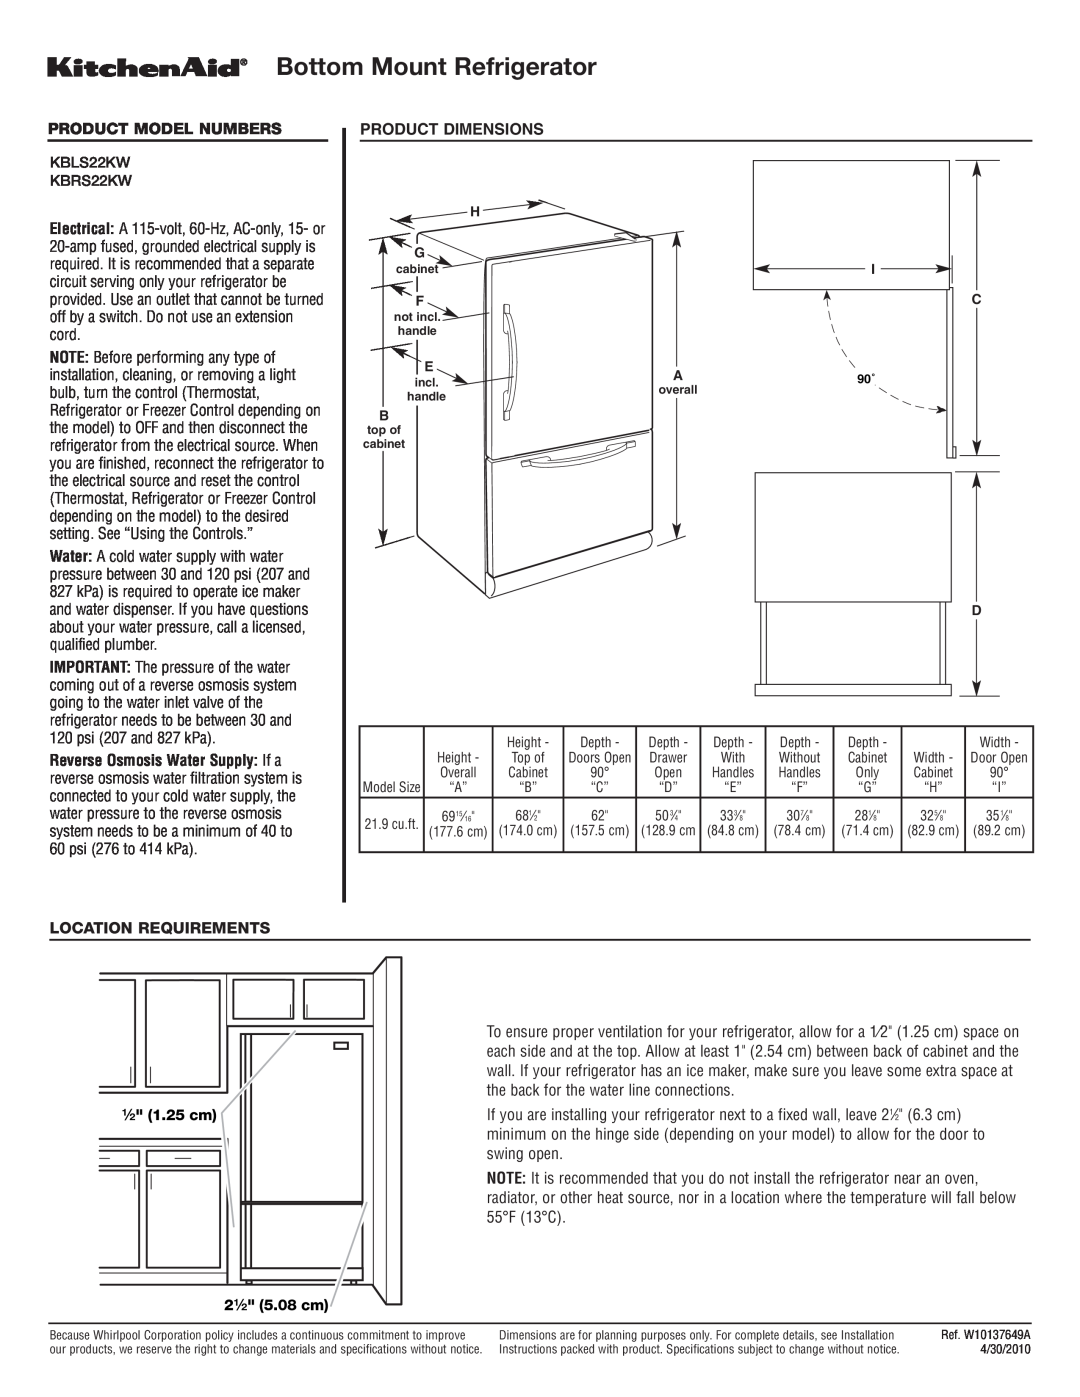 KitchenAid KBRS22KW dimensions Bottom Mount Refrigerator, Product Model Numbers, Product Dimensions, Location Requirements 